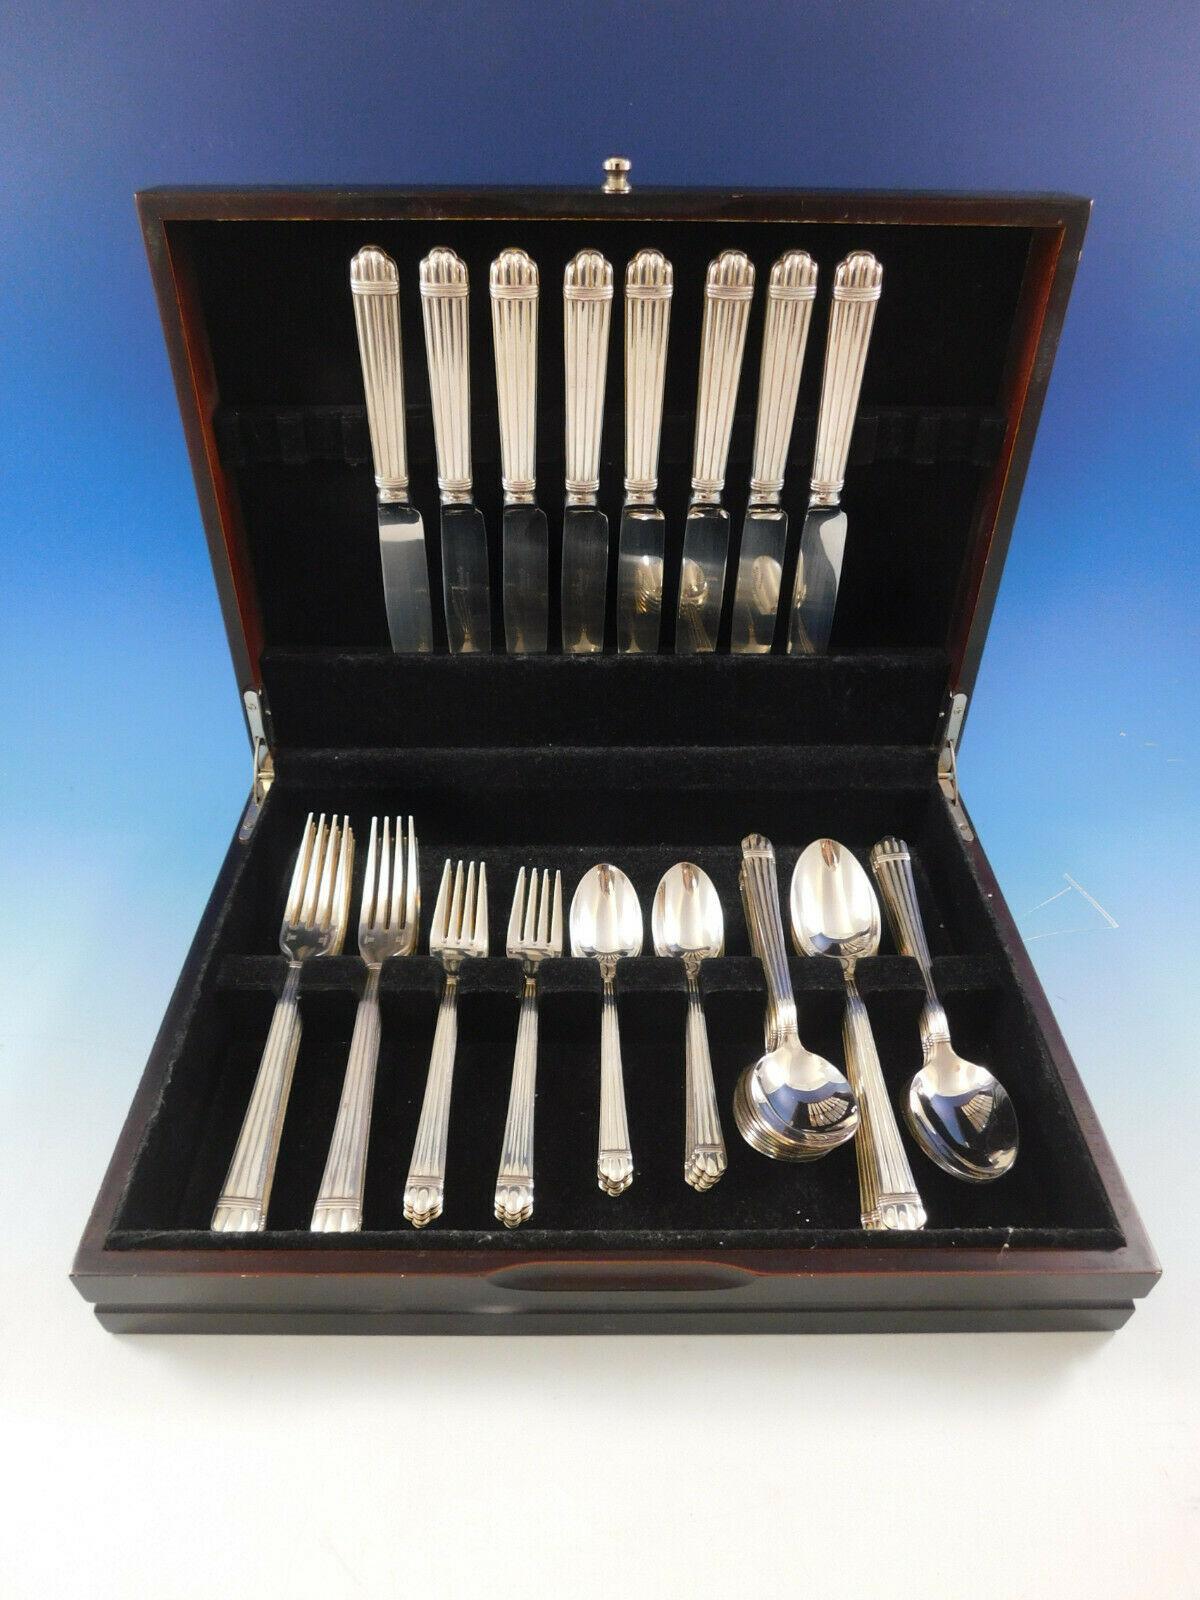 Dinner size Aria by Christofle France estate silverplate flatware set of 48 pieces. This set includes:

8 dinner size knives, 9 3/4